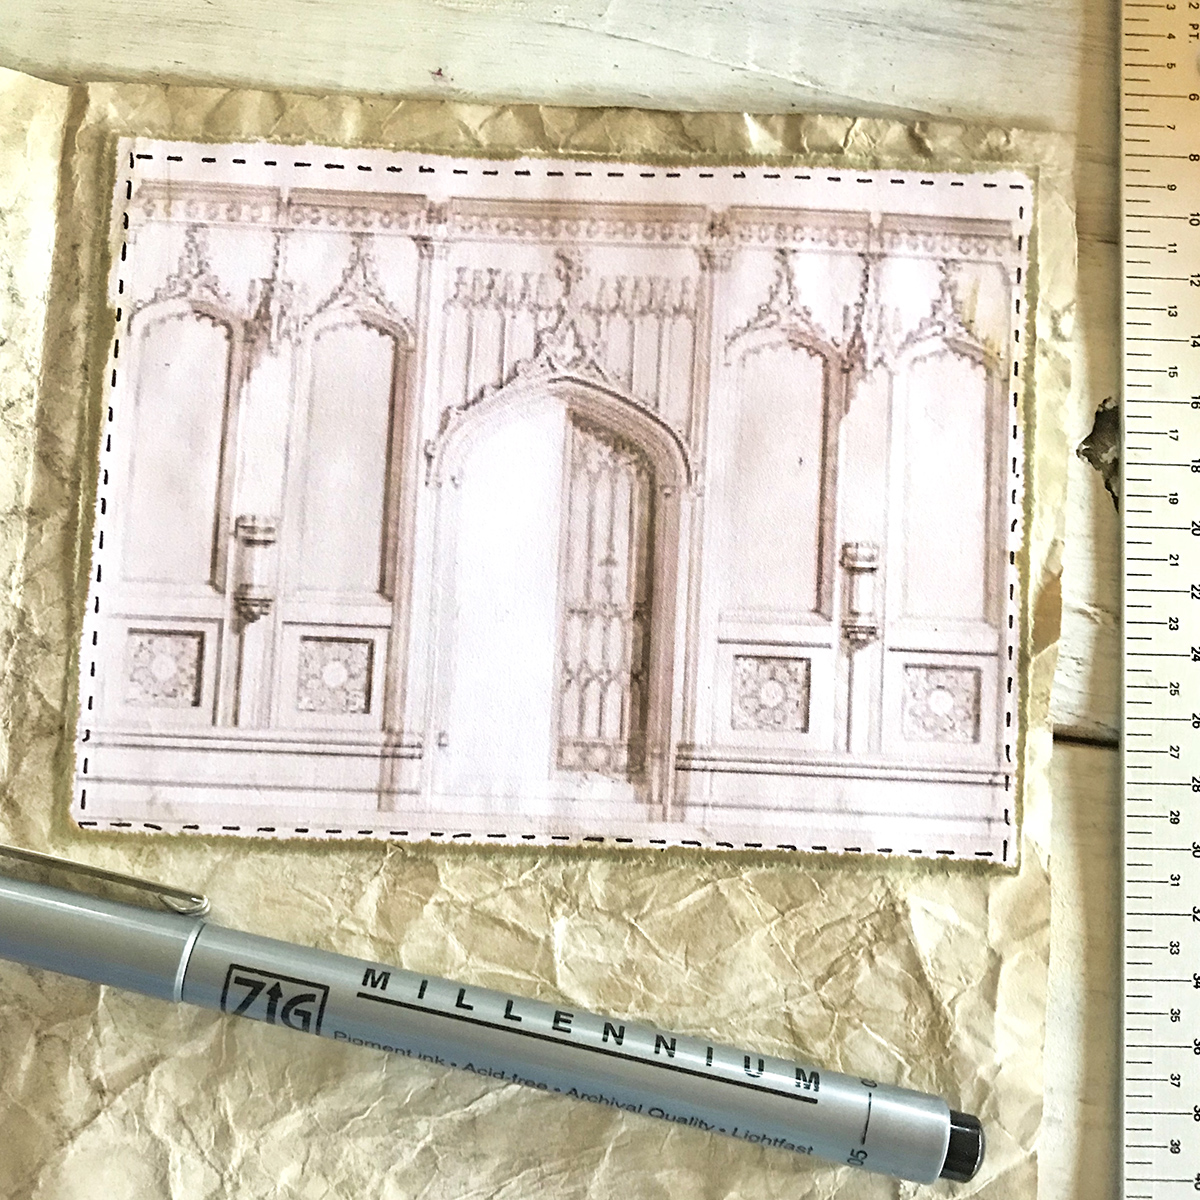 Architectural print with stitches